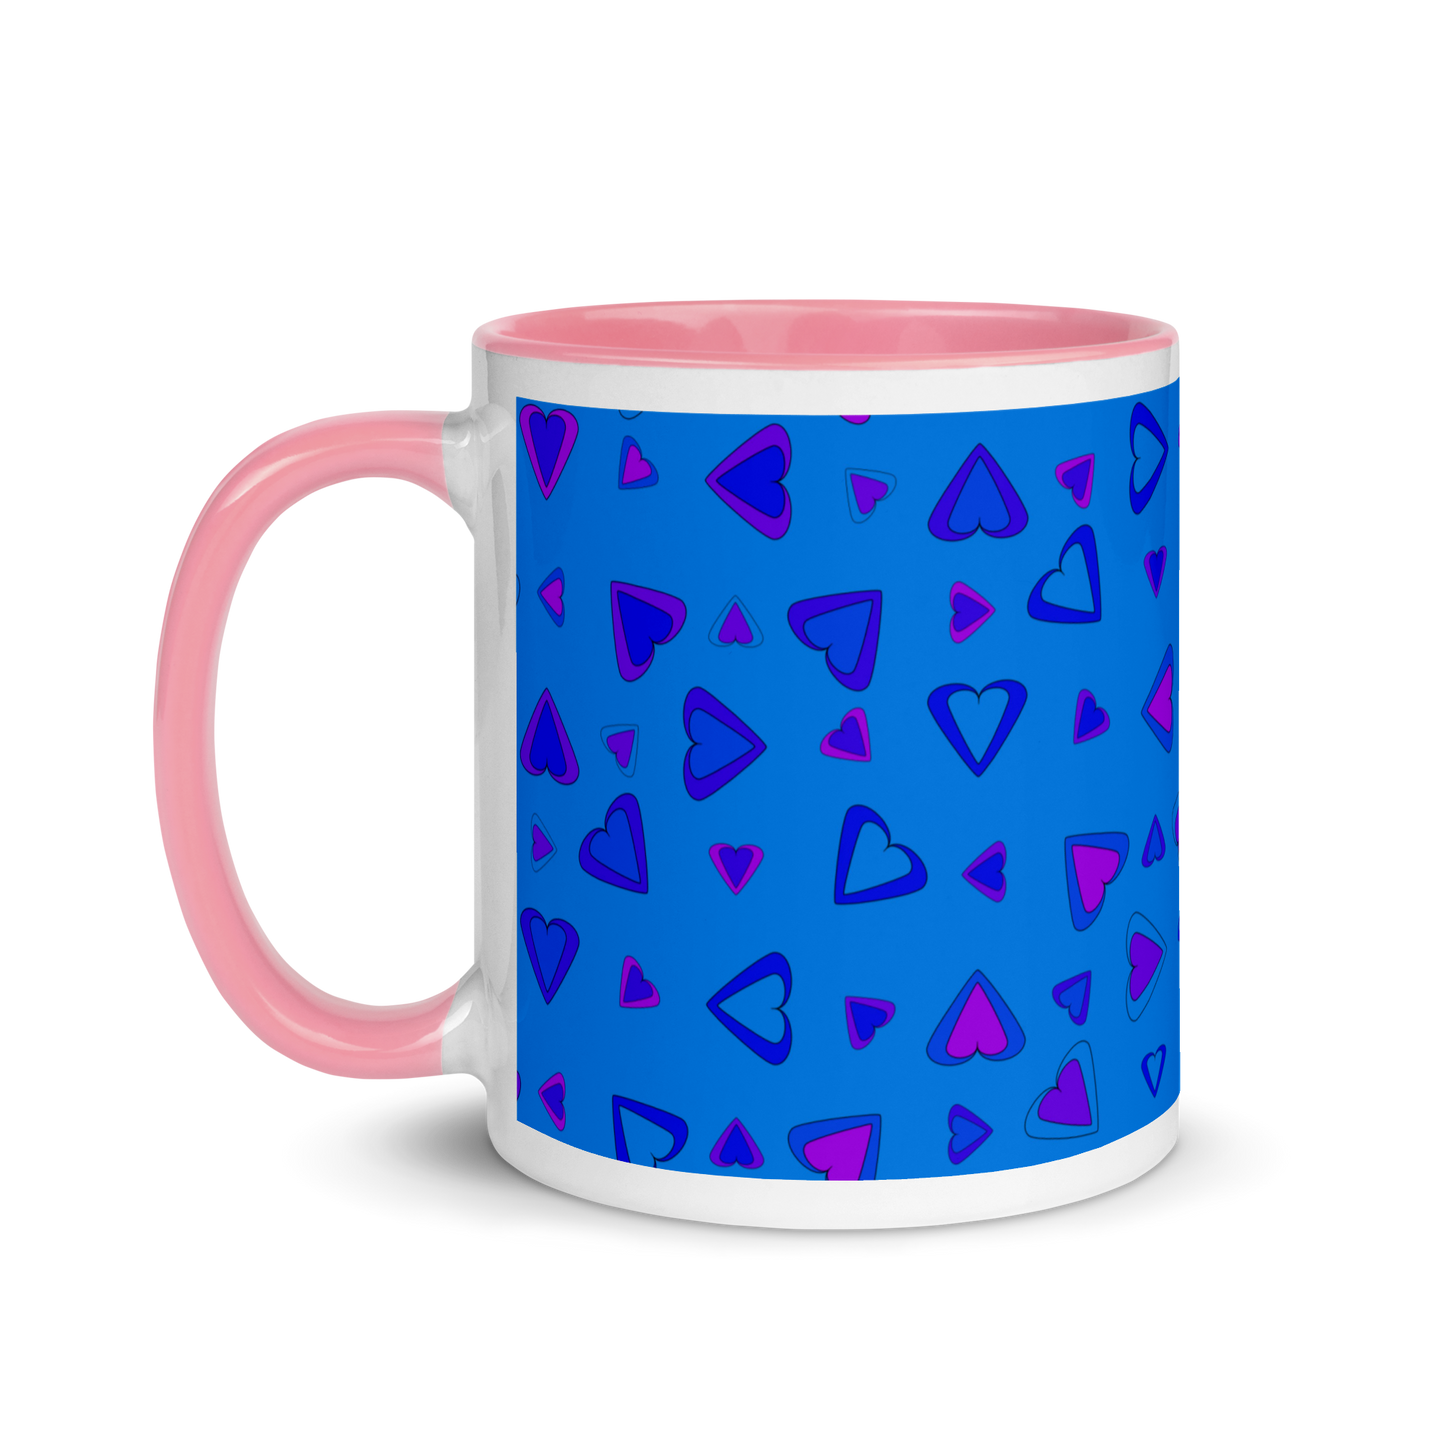 Rainbow Of Hearts | Batch 01 | Seamless Patterns | White Ceramic Mug with Color Inside - #10